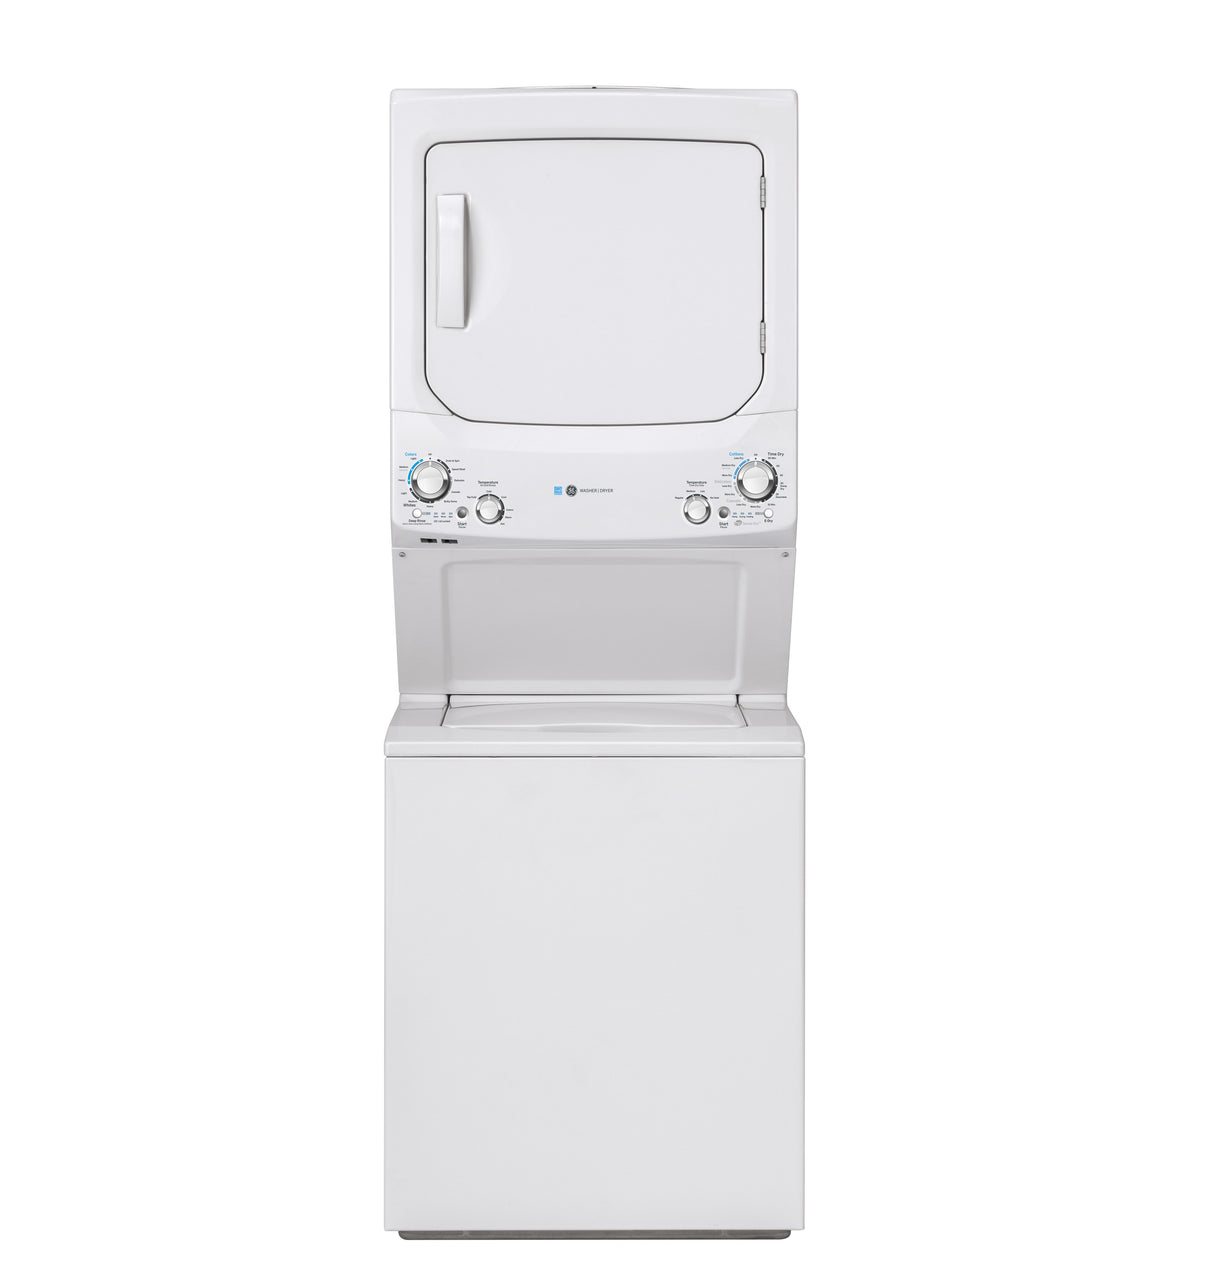 GE Unitized Spacemaker(R) ENERGY STAR(R) 3.9 cu. ft. Capacity Washer with Stainless Steel Basket and 5.9 cu. ft. Capacity Electric Dryer - (GUD27EESNWW)